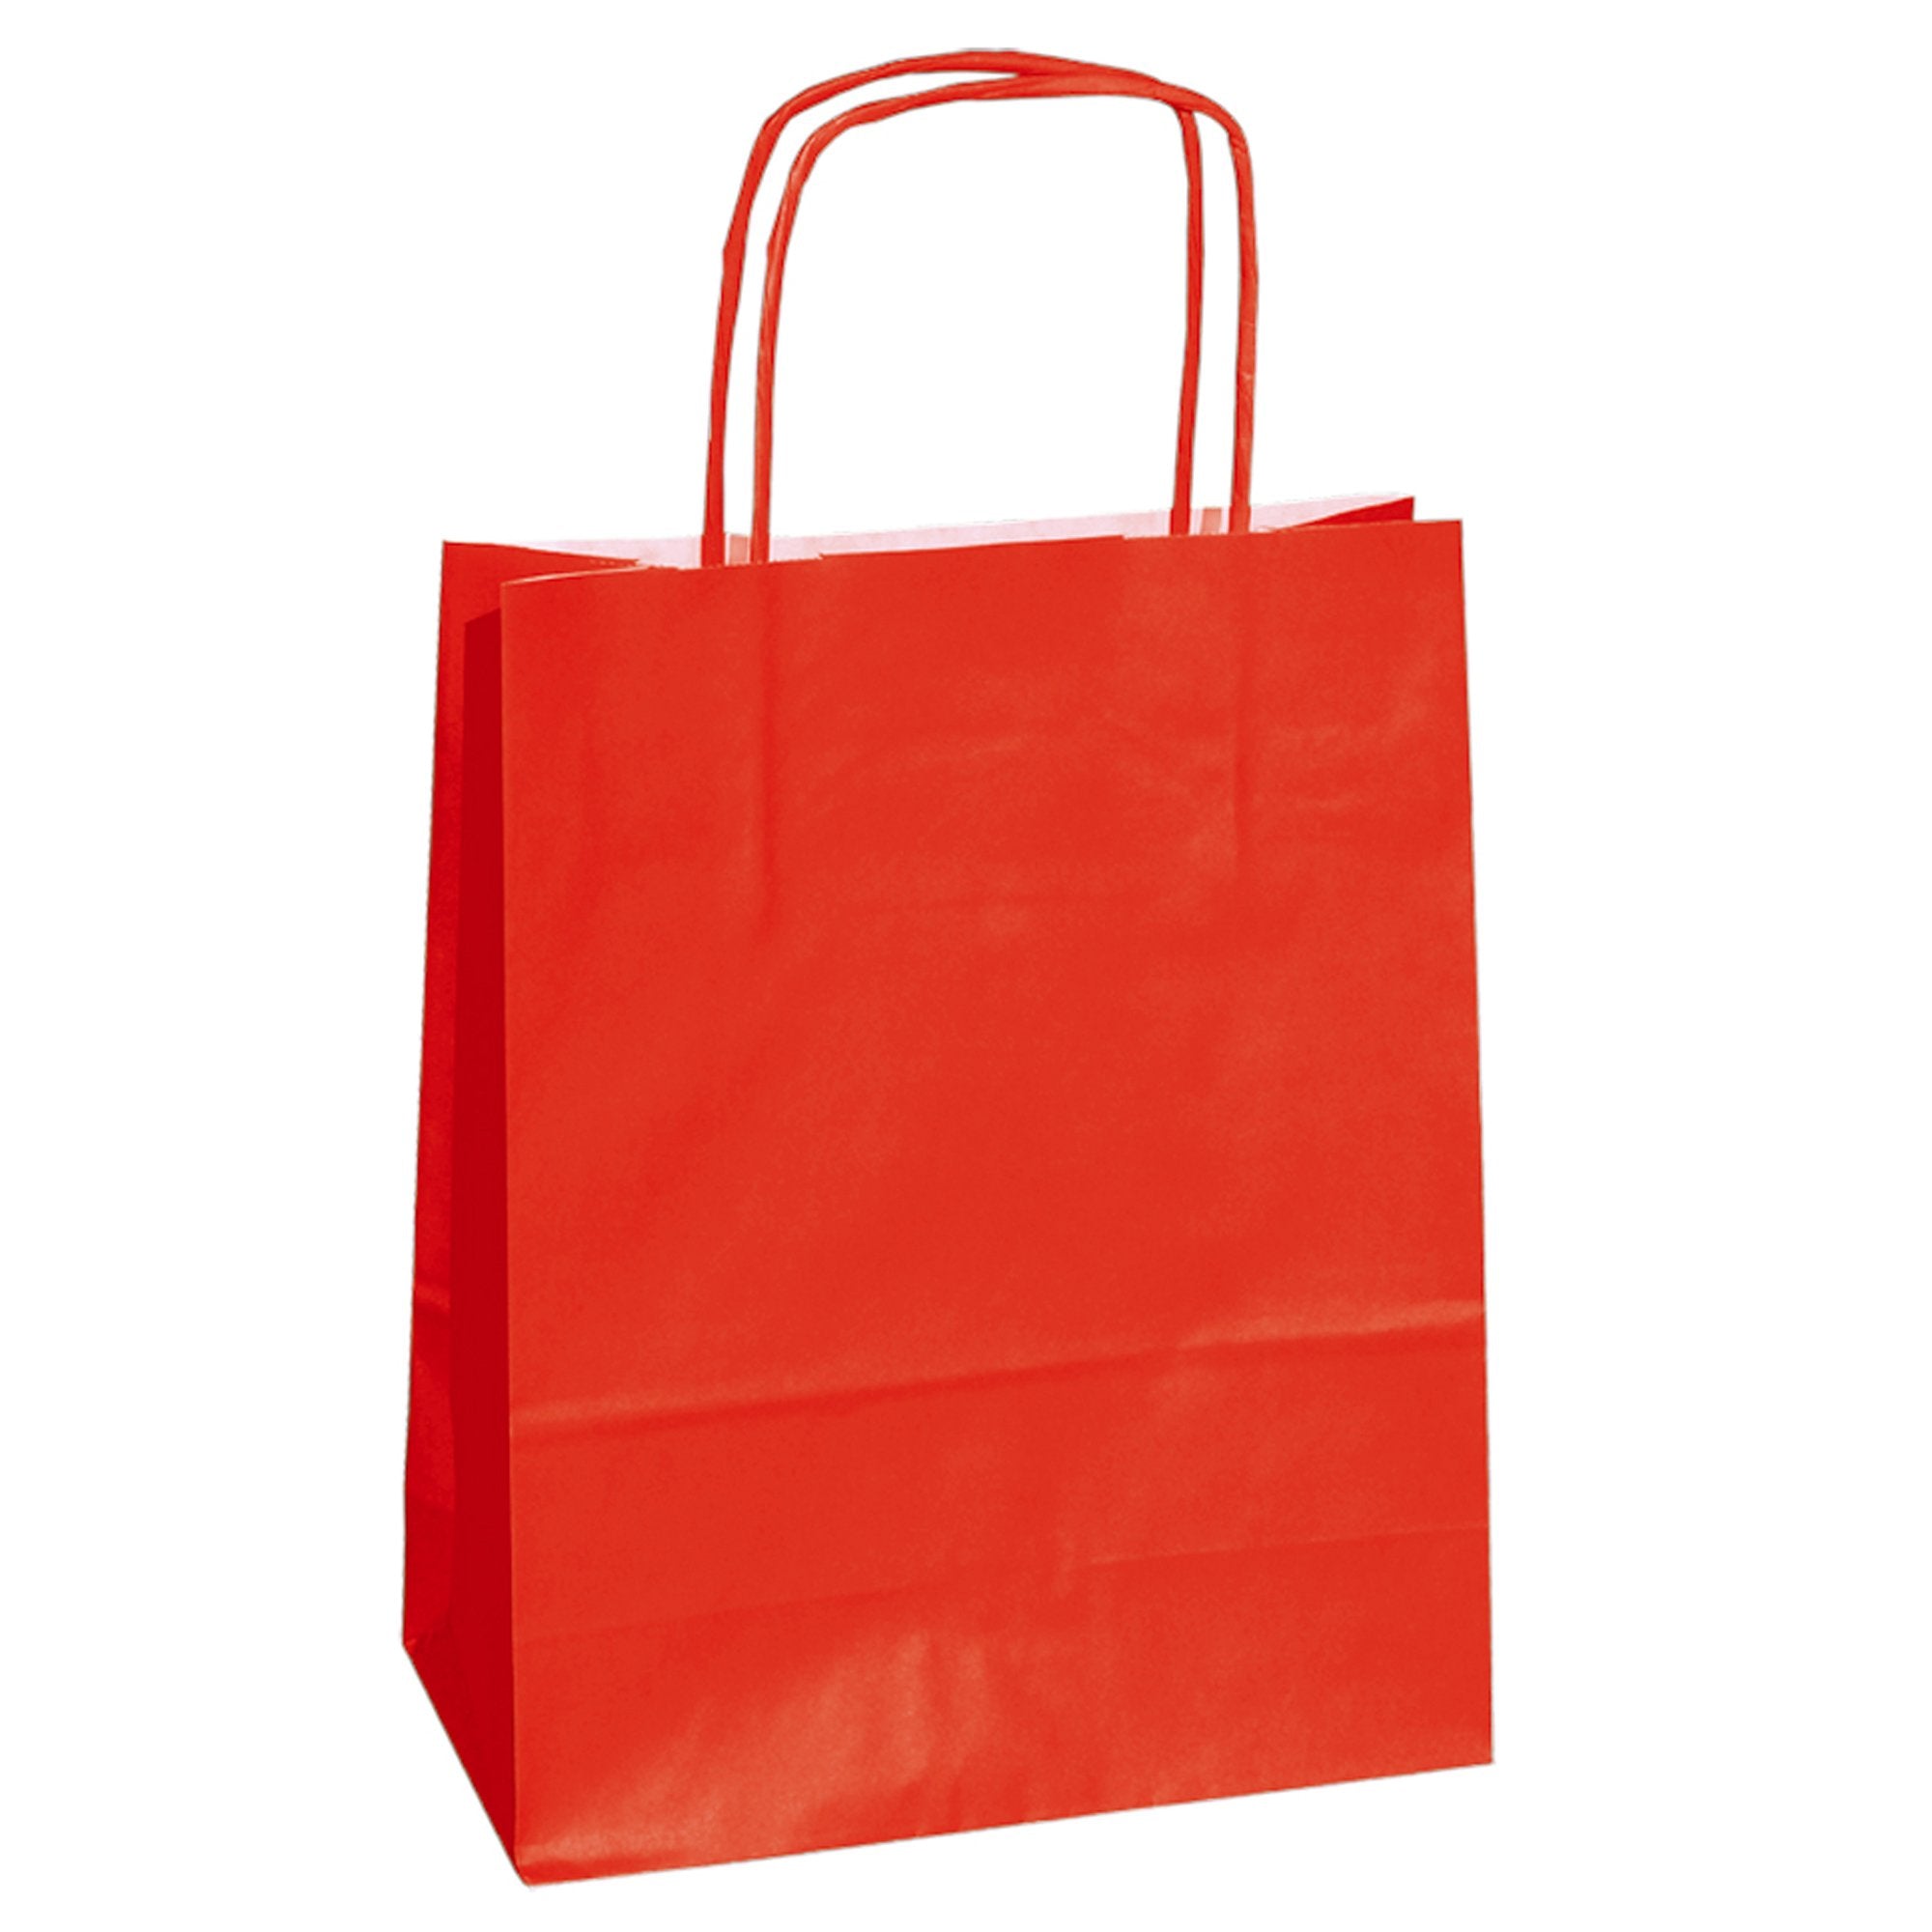 mainetti-bags-25-shoppers-carta-kraft-14x9x20cm-twisted-rosso